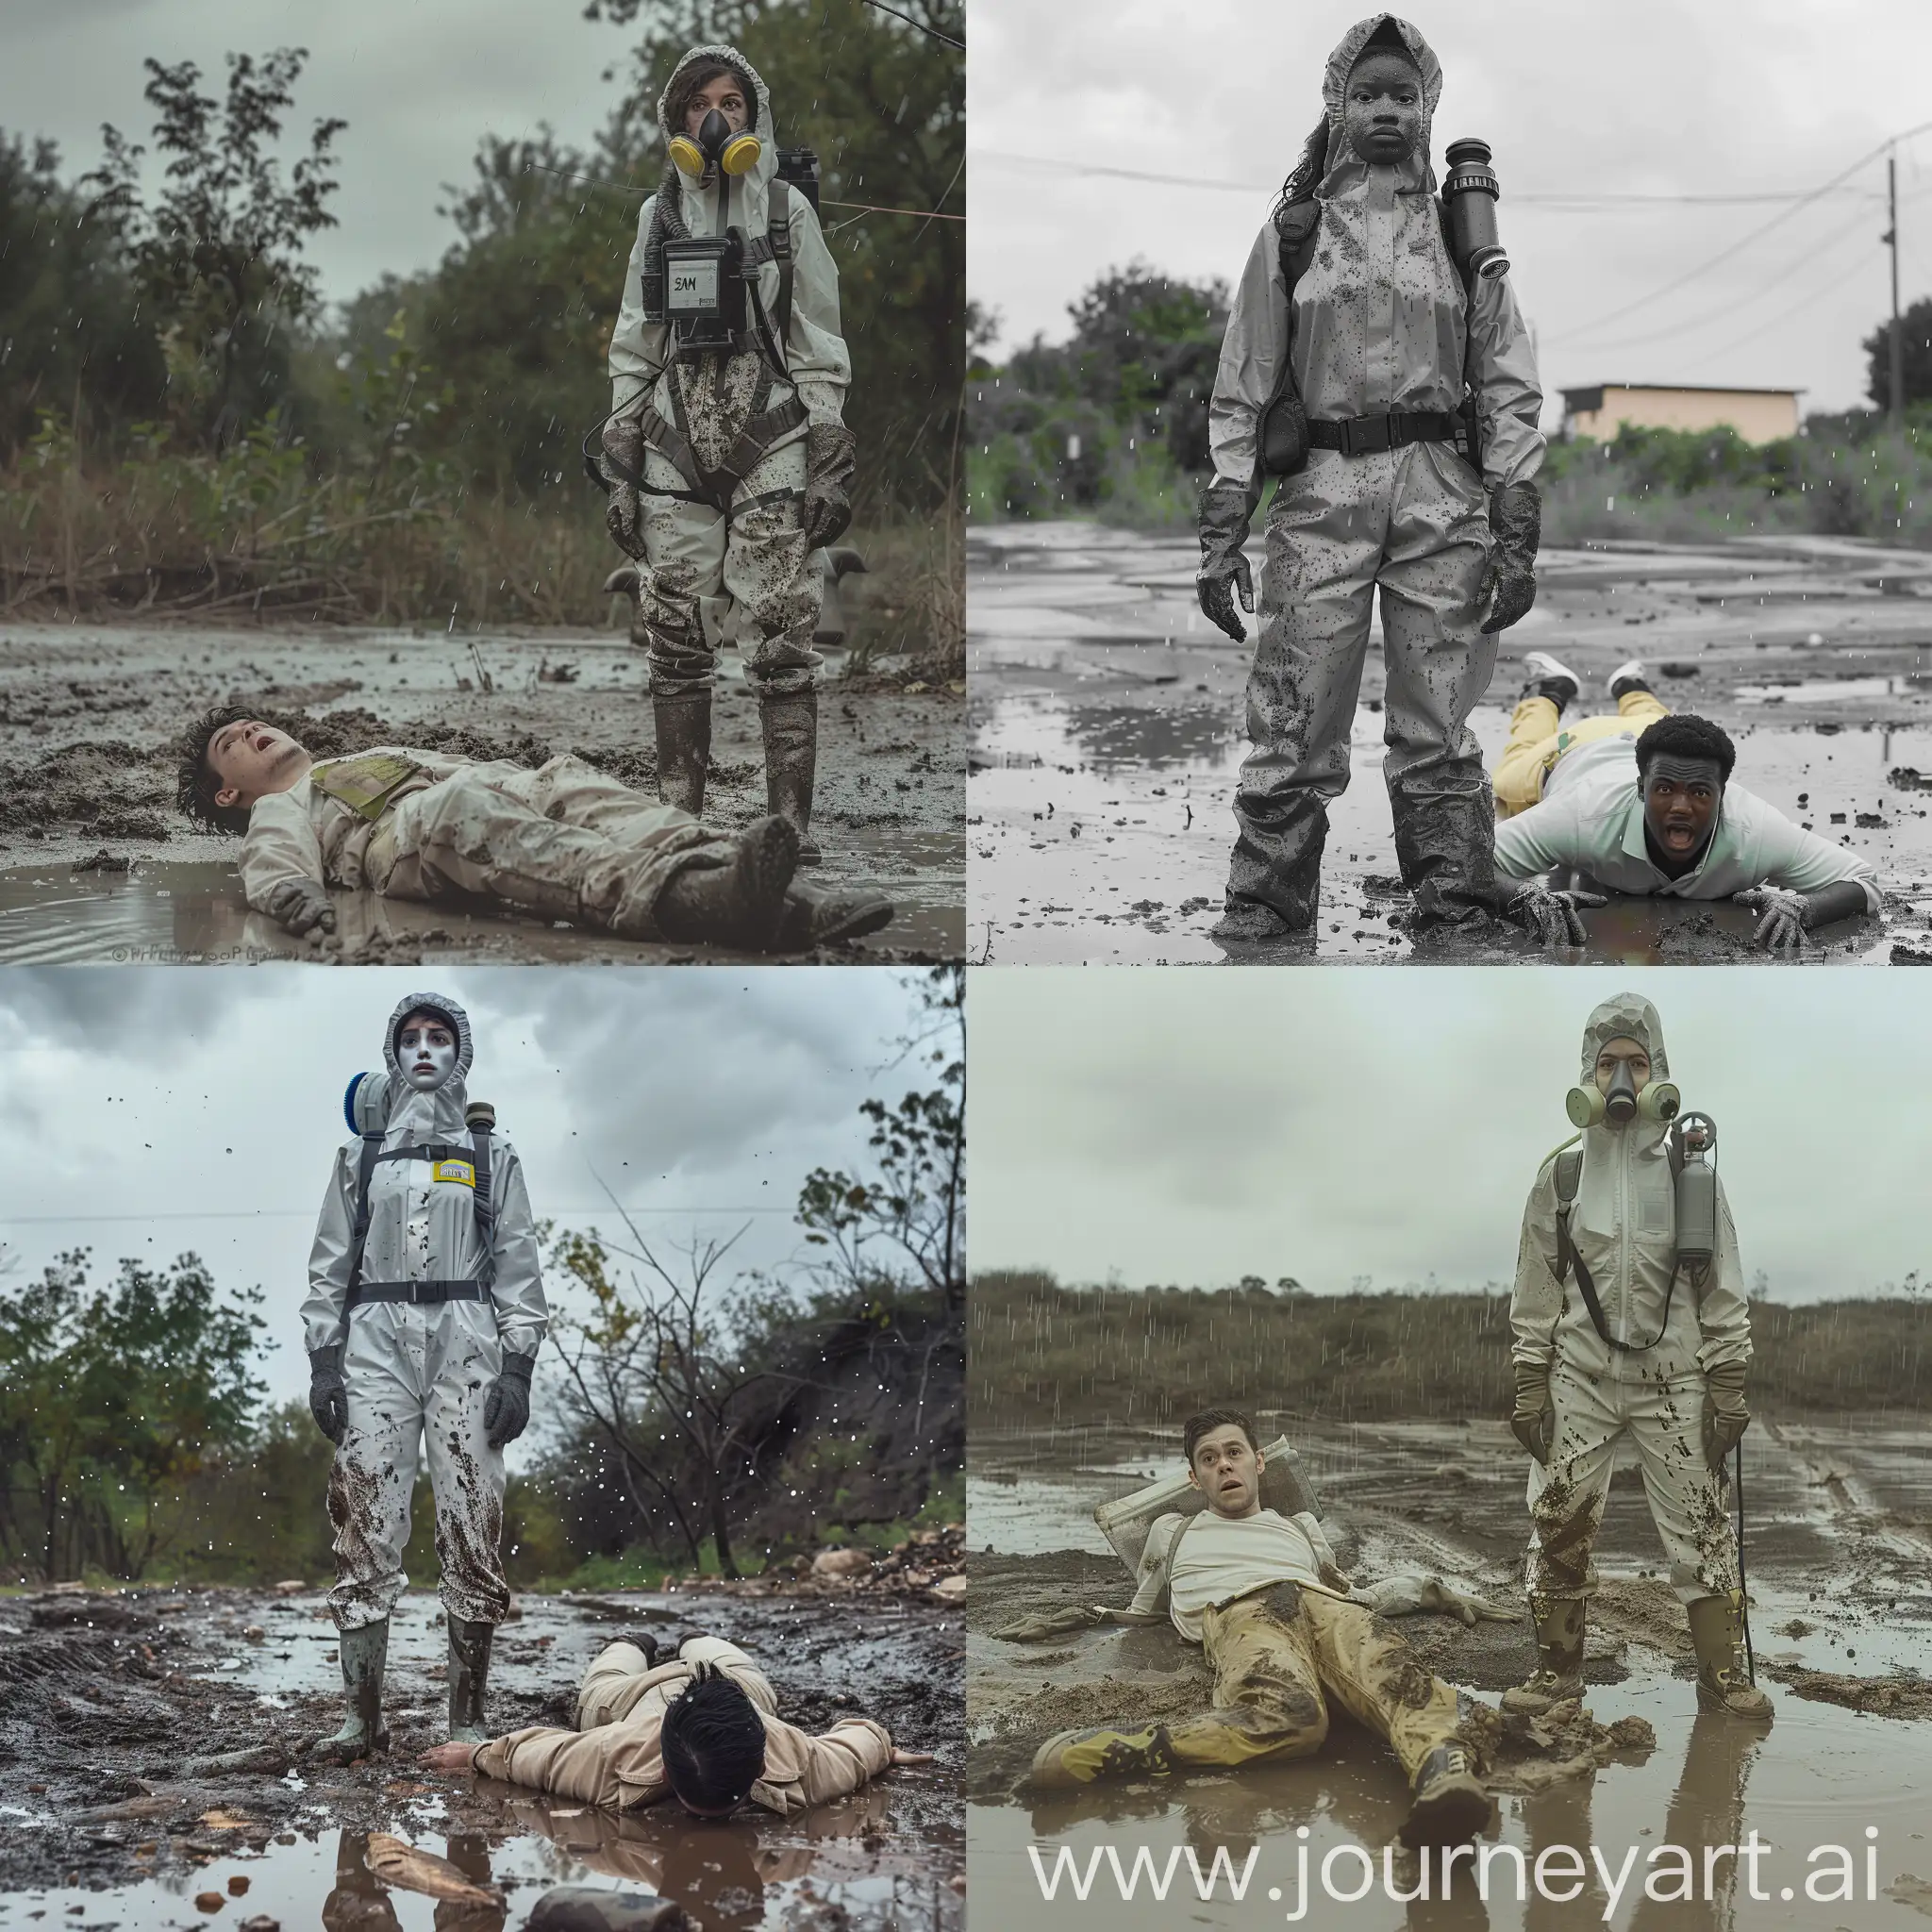 Rainy-Day-Hazmat-Rescue-Woman-in-Protective-Gear-Saves-Scared-Man